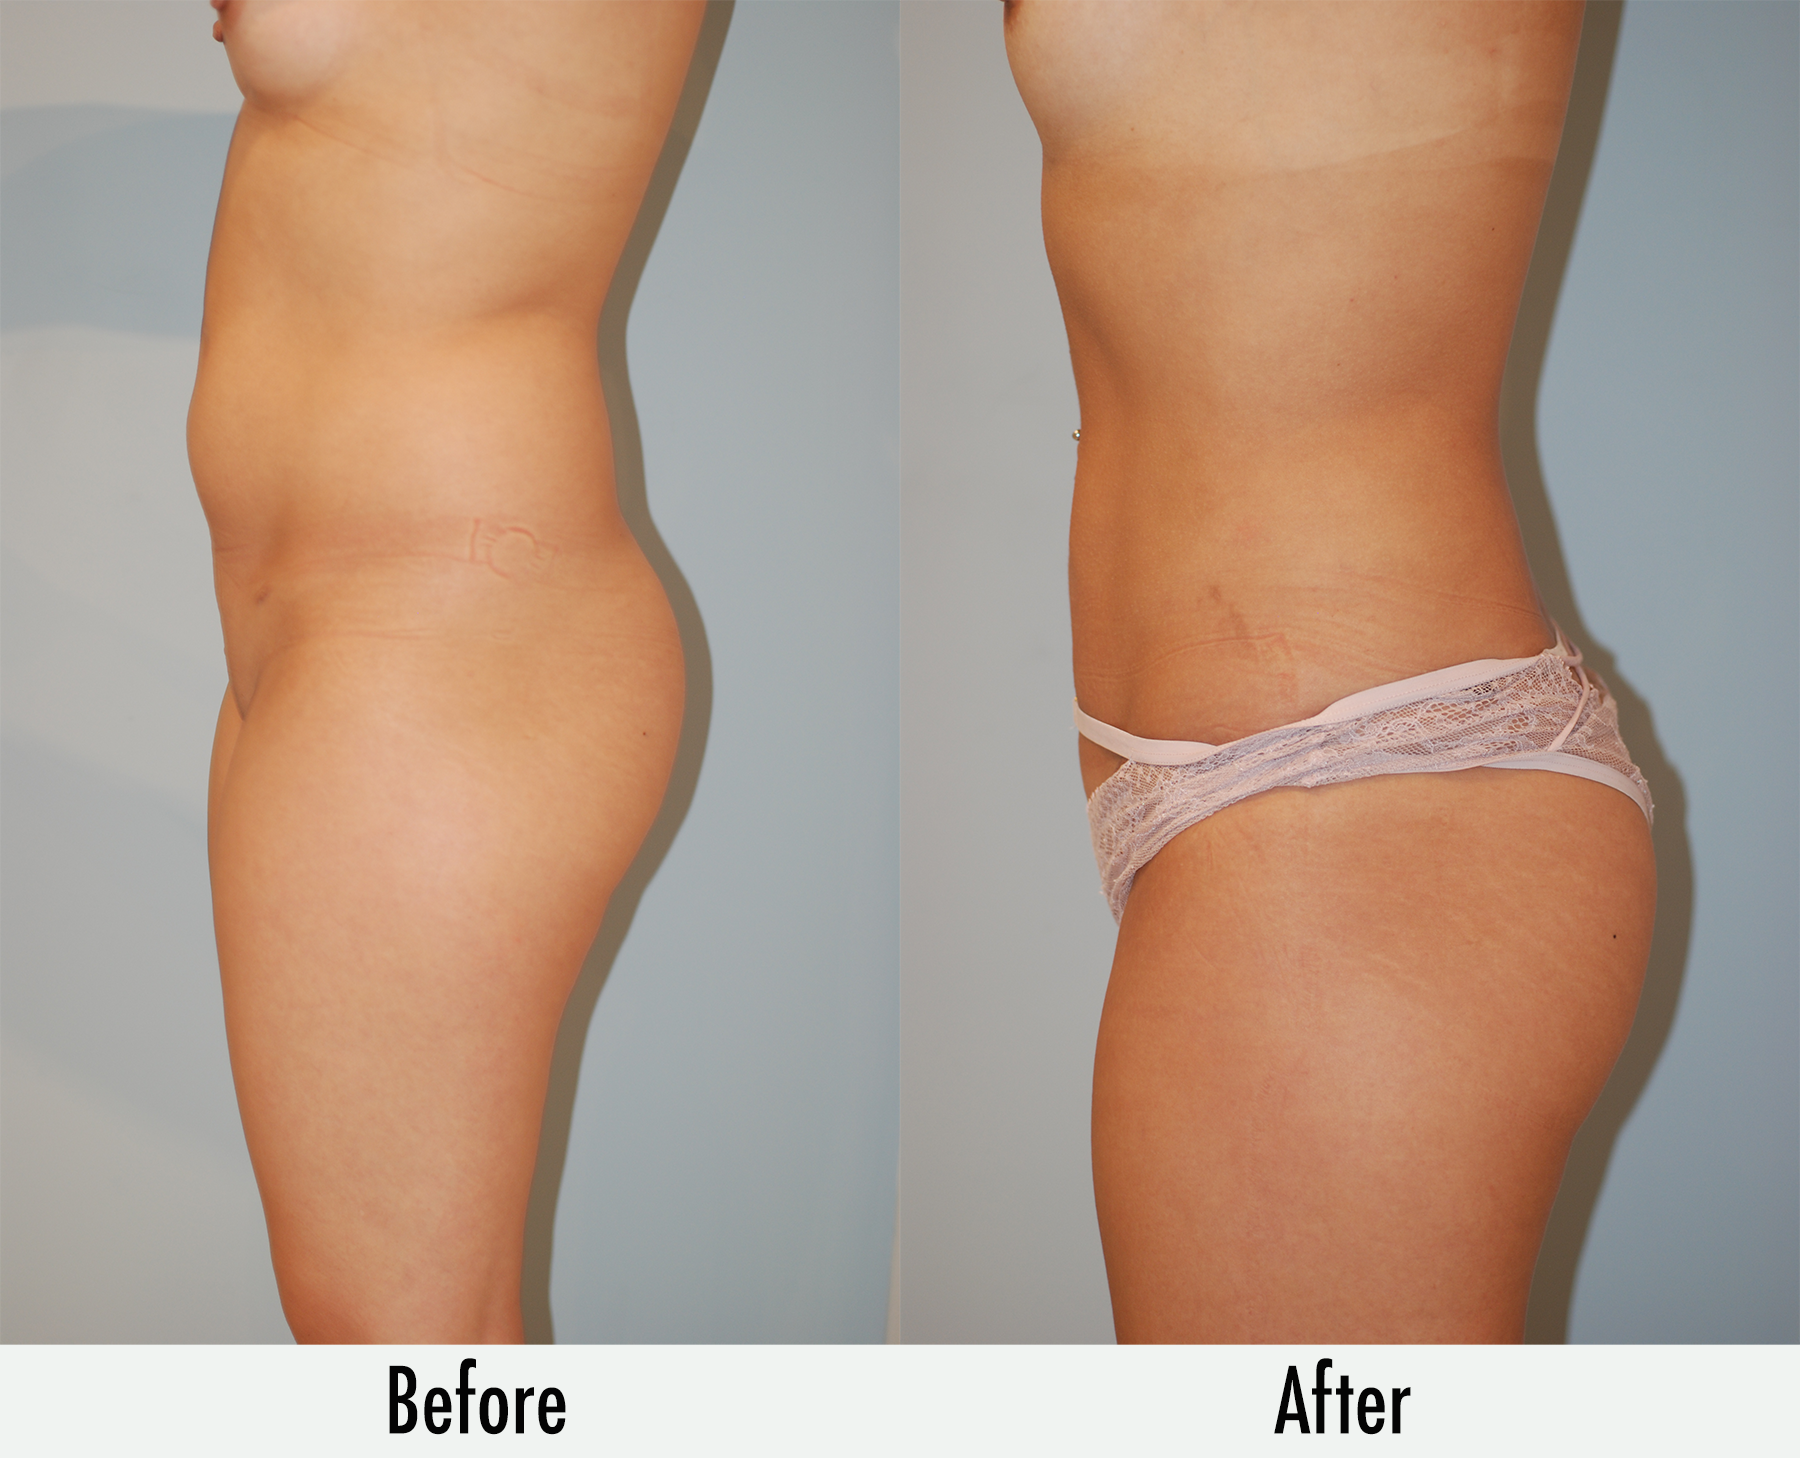 Hips liposuction: cost, procedure and results before and after